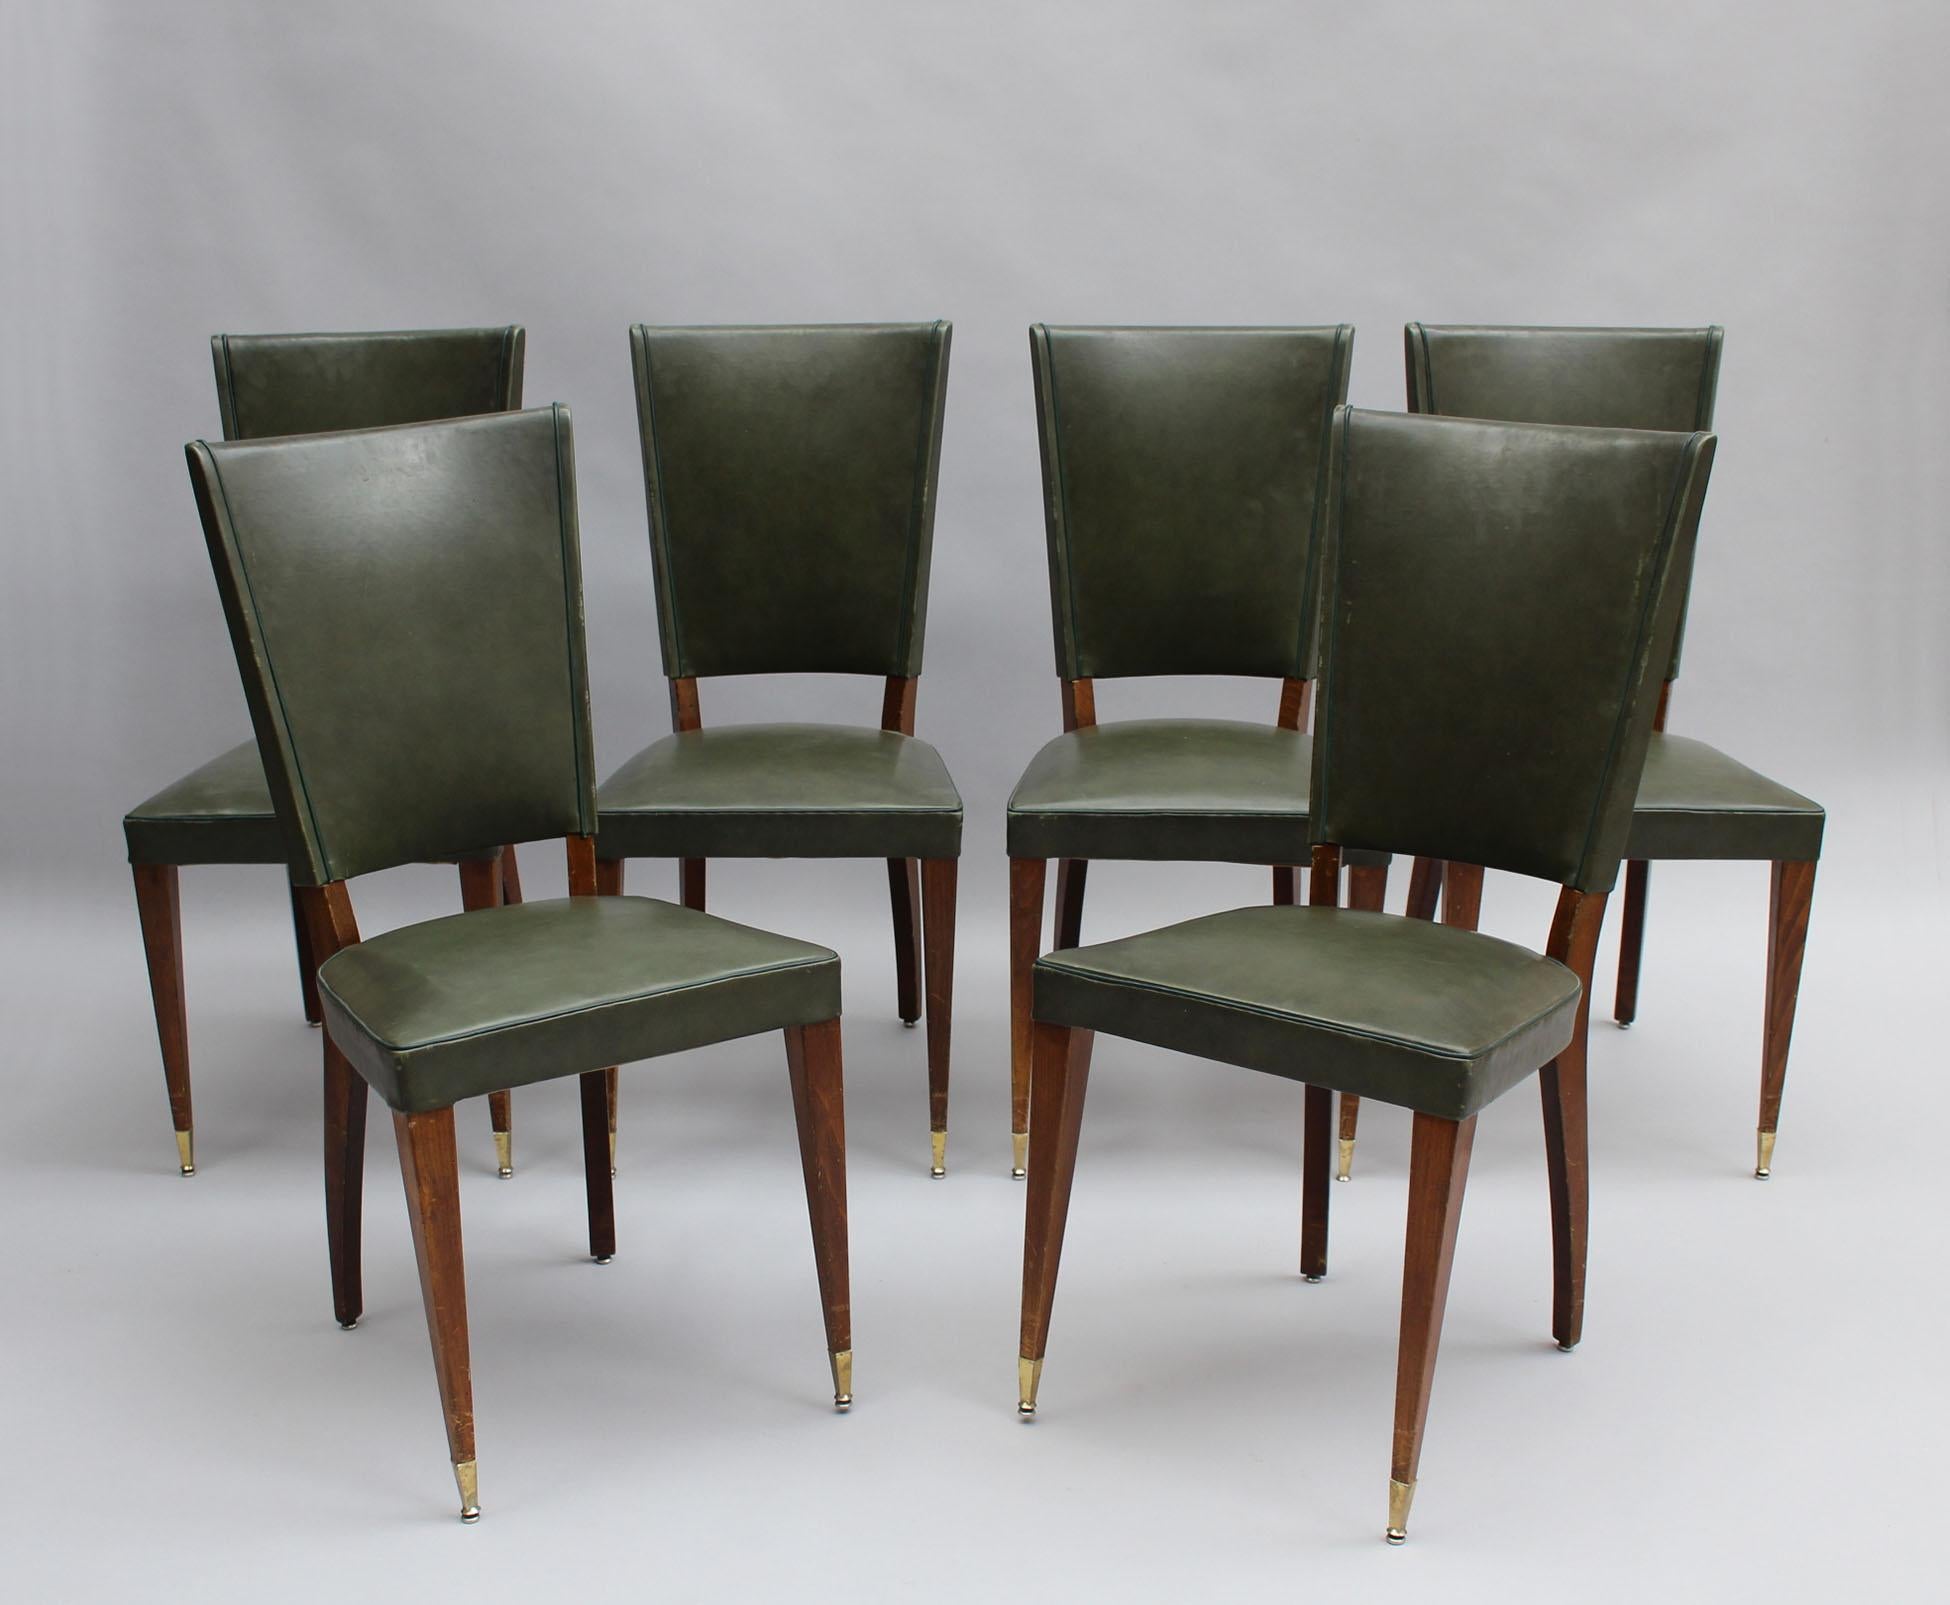 A set of fine French Art Deco dining chairs in stained beech with bronze sabots.